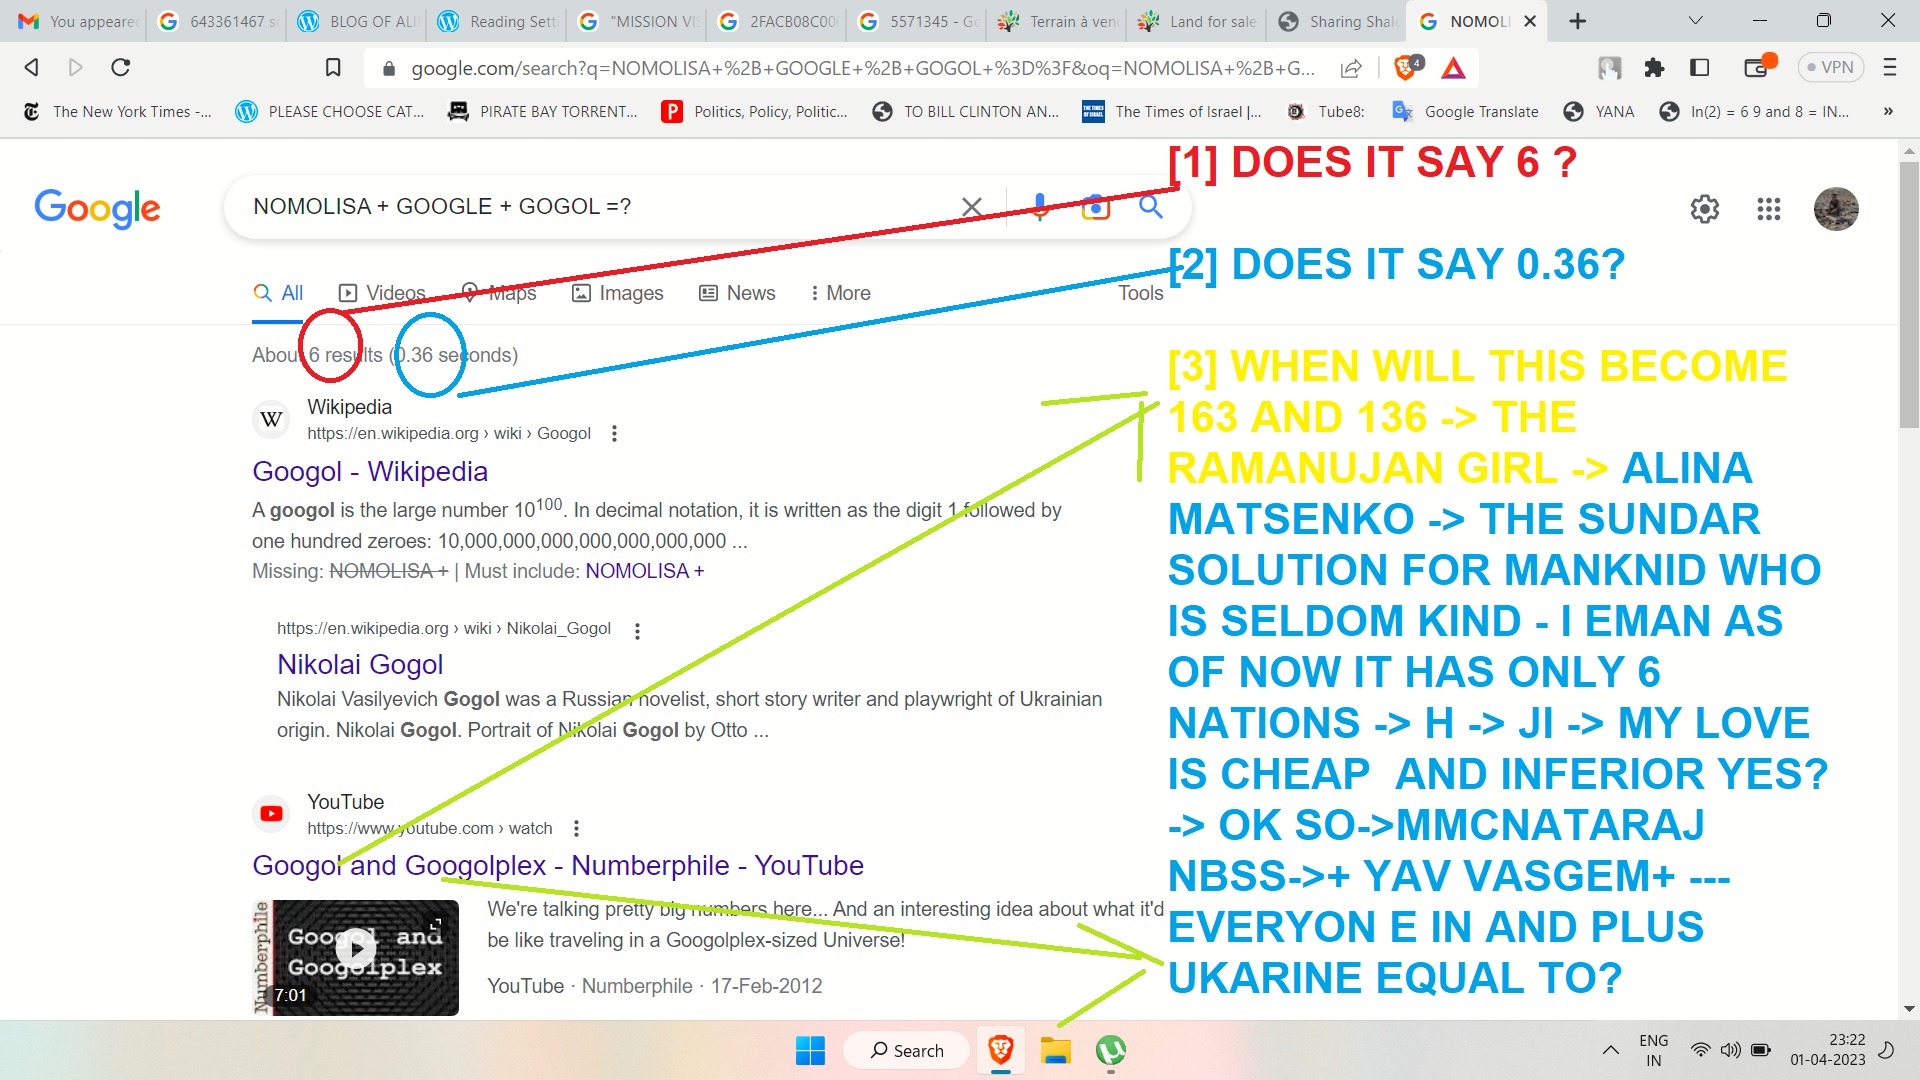 NOMOLISA + GOOGLE + GOGOL =?  [1] DOES IT SAY 6 ?  [2] DOES IT SAY 0.36?  [3] WHEN WILL THIS BECOME 163 AND 136 -> THE RAMANUJAN GIRL -> ALINA MATSENKO -> THE SUNDAR SOLUTION FOR MANKNID WHO IS SELDOM KIND - I EMAN AS OF NOW IT HAS ONLY 6 NATIONS -> H -> JI -> MY LOVE IS CHEAP  AND INFERIOR YES? -> OK SO->MMCNATARAJ NBSS->+ YAV VASGEM+ --- EVERYON E IN AND PLUS UKARINE EQUAL TO?  alina matsneko ajay mishra tramanujan and ramanujan real loeve story andthe irodov plus ramanujan plus clinton item song for netanayhu -> is me say - biden - macron and insead and iit kanour and wharton nd heberw uievristy and harvard and sorborbrone nd china - tinshua and colvin collge and - i cant tye mroe -> zelenesky - did me say - alina memsaheb not alina -> kak dila moi drig -> poltava -> paris -> and whats teh ebst otehr p word s u now - did me ay madarchis -> hidnus nd jews 0deid mesay something? this is caled 643361467 and misison  vison story and communication and its not sissy cybery war biut beyond